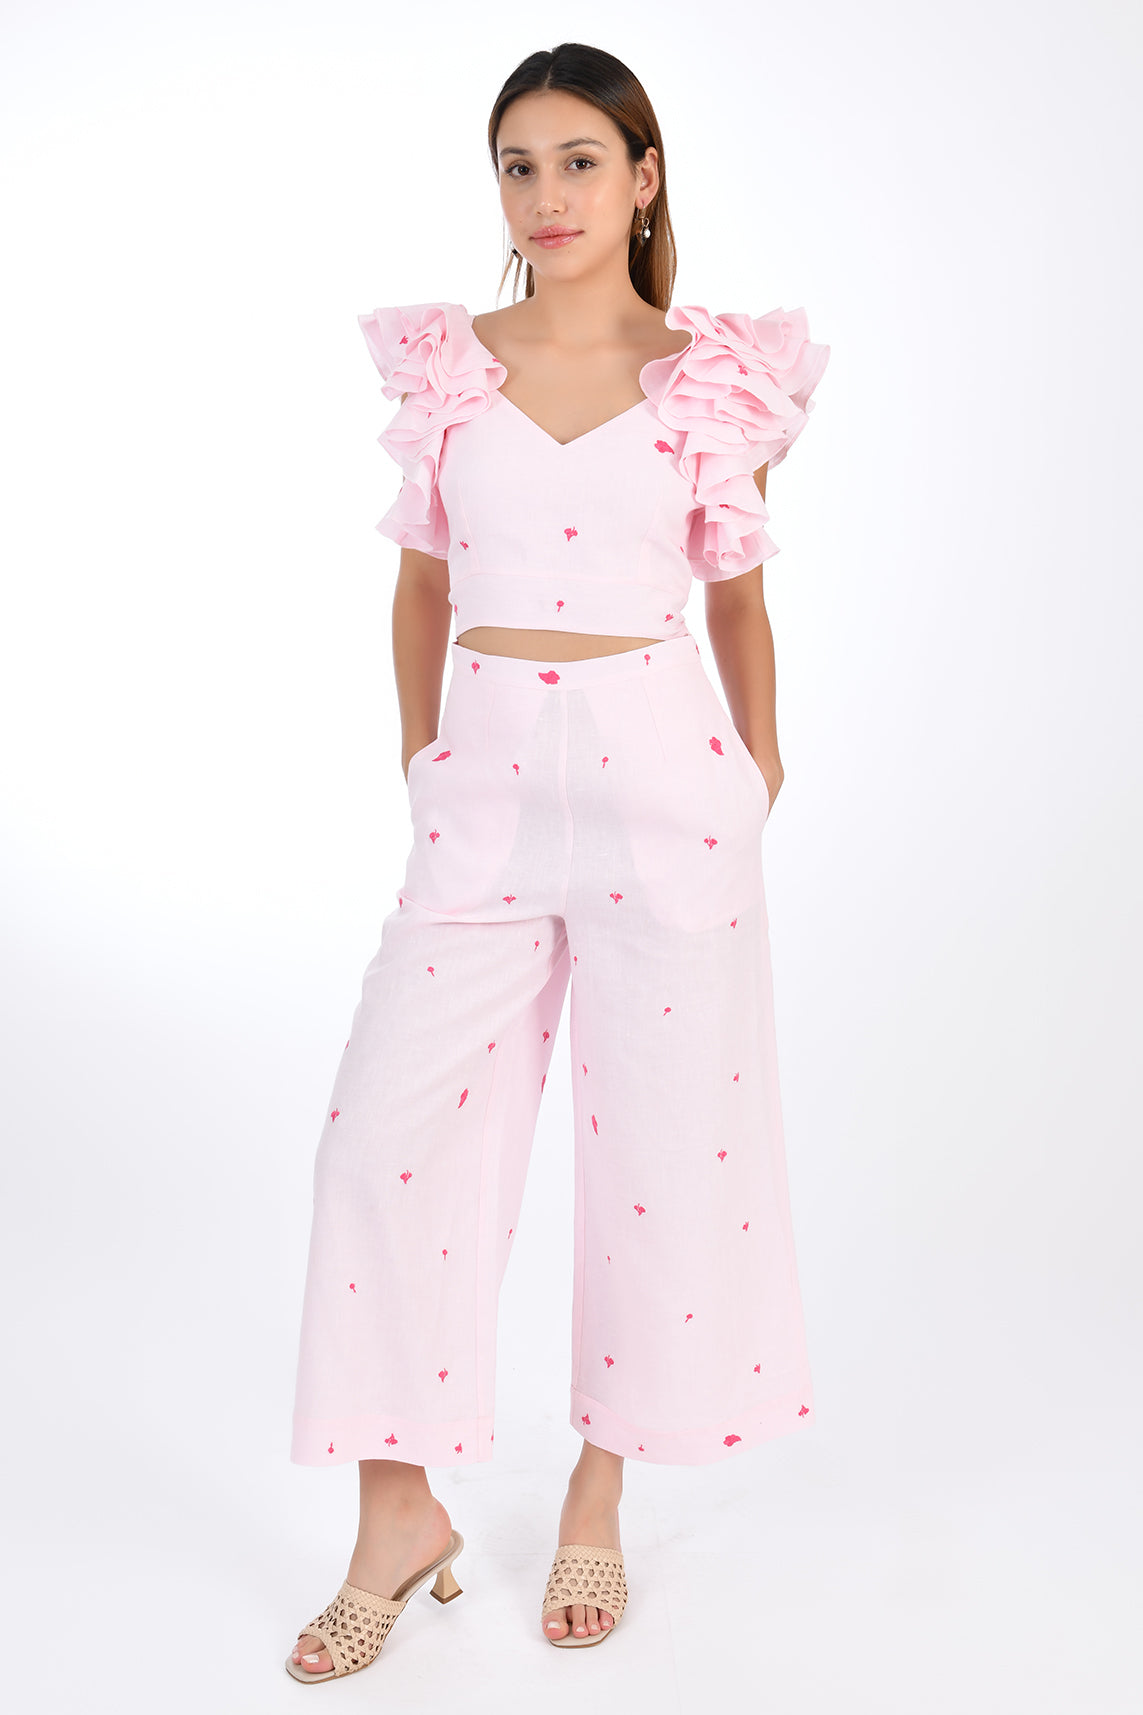 FANM MON ANAIS 2 Piece Linen Top and Pants Set. Sleeveless top features ruffles with intricate embroidery detail and back detail of bow and button closure, while the wide-leg pants boast a matching embroidery detail and on-seam pockets for a cohesive look. Front View.